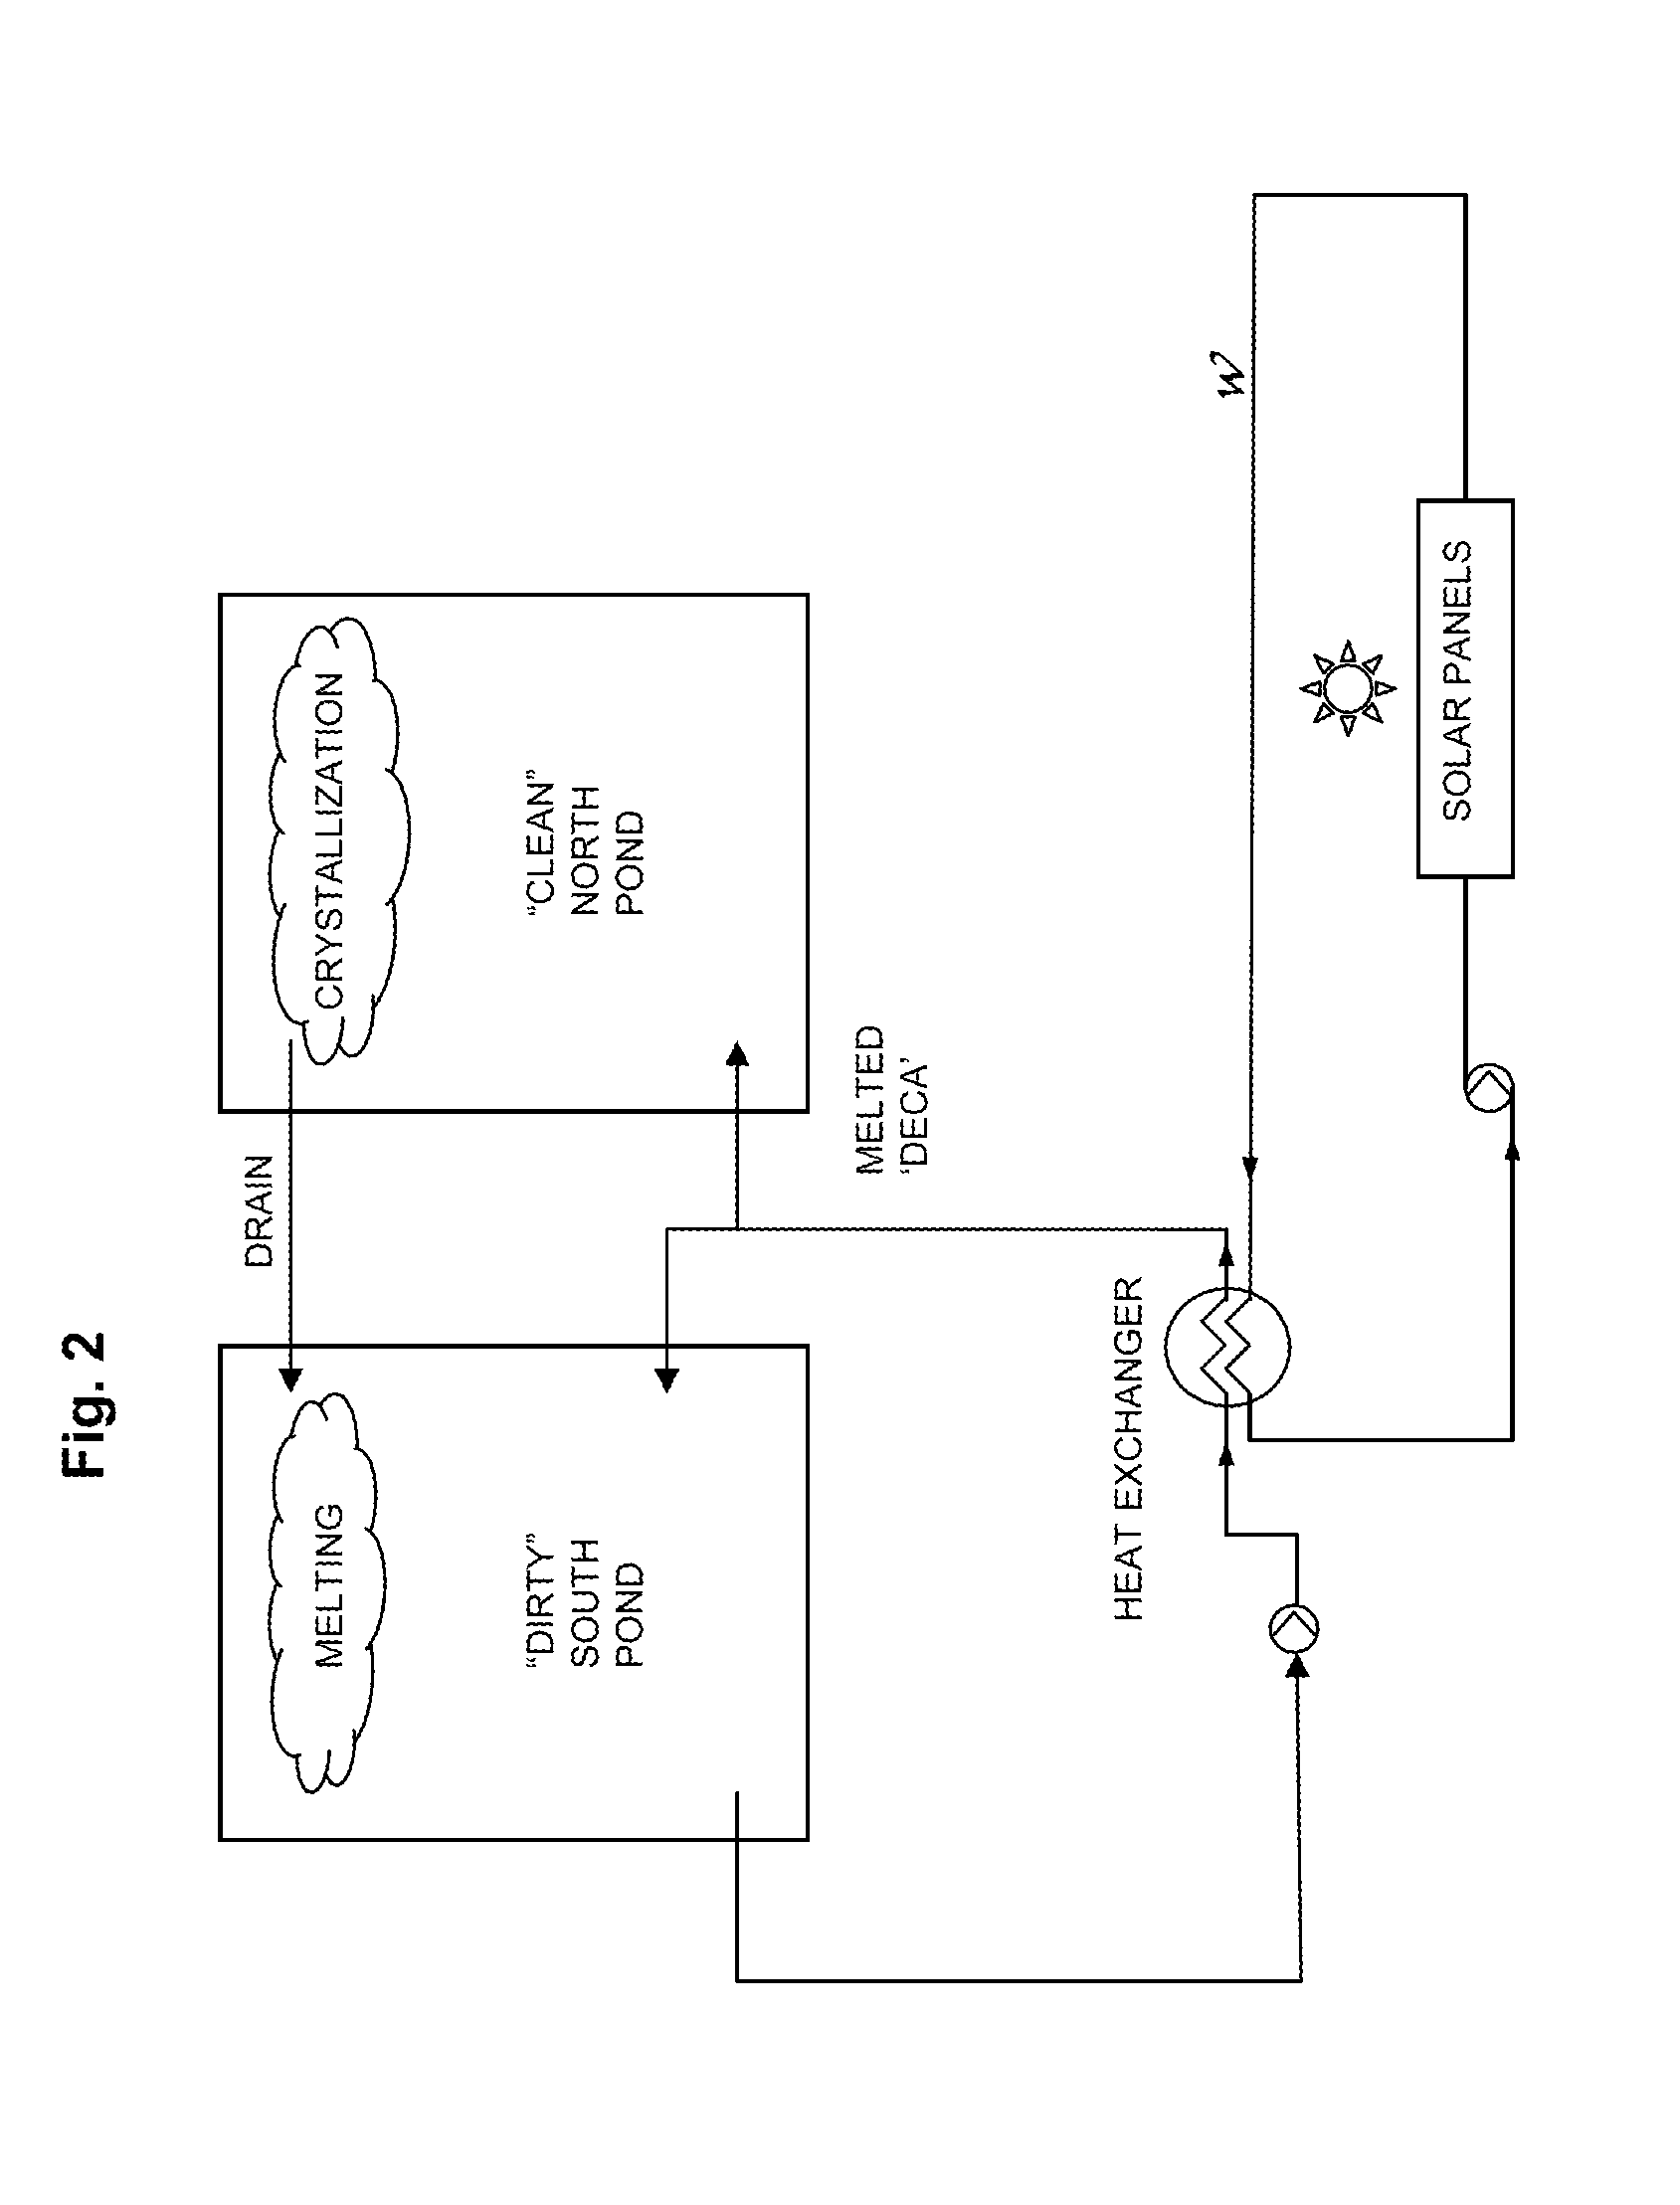 Method for increasing evaporation rate of an evaporative pond using solar energy